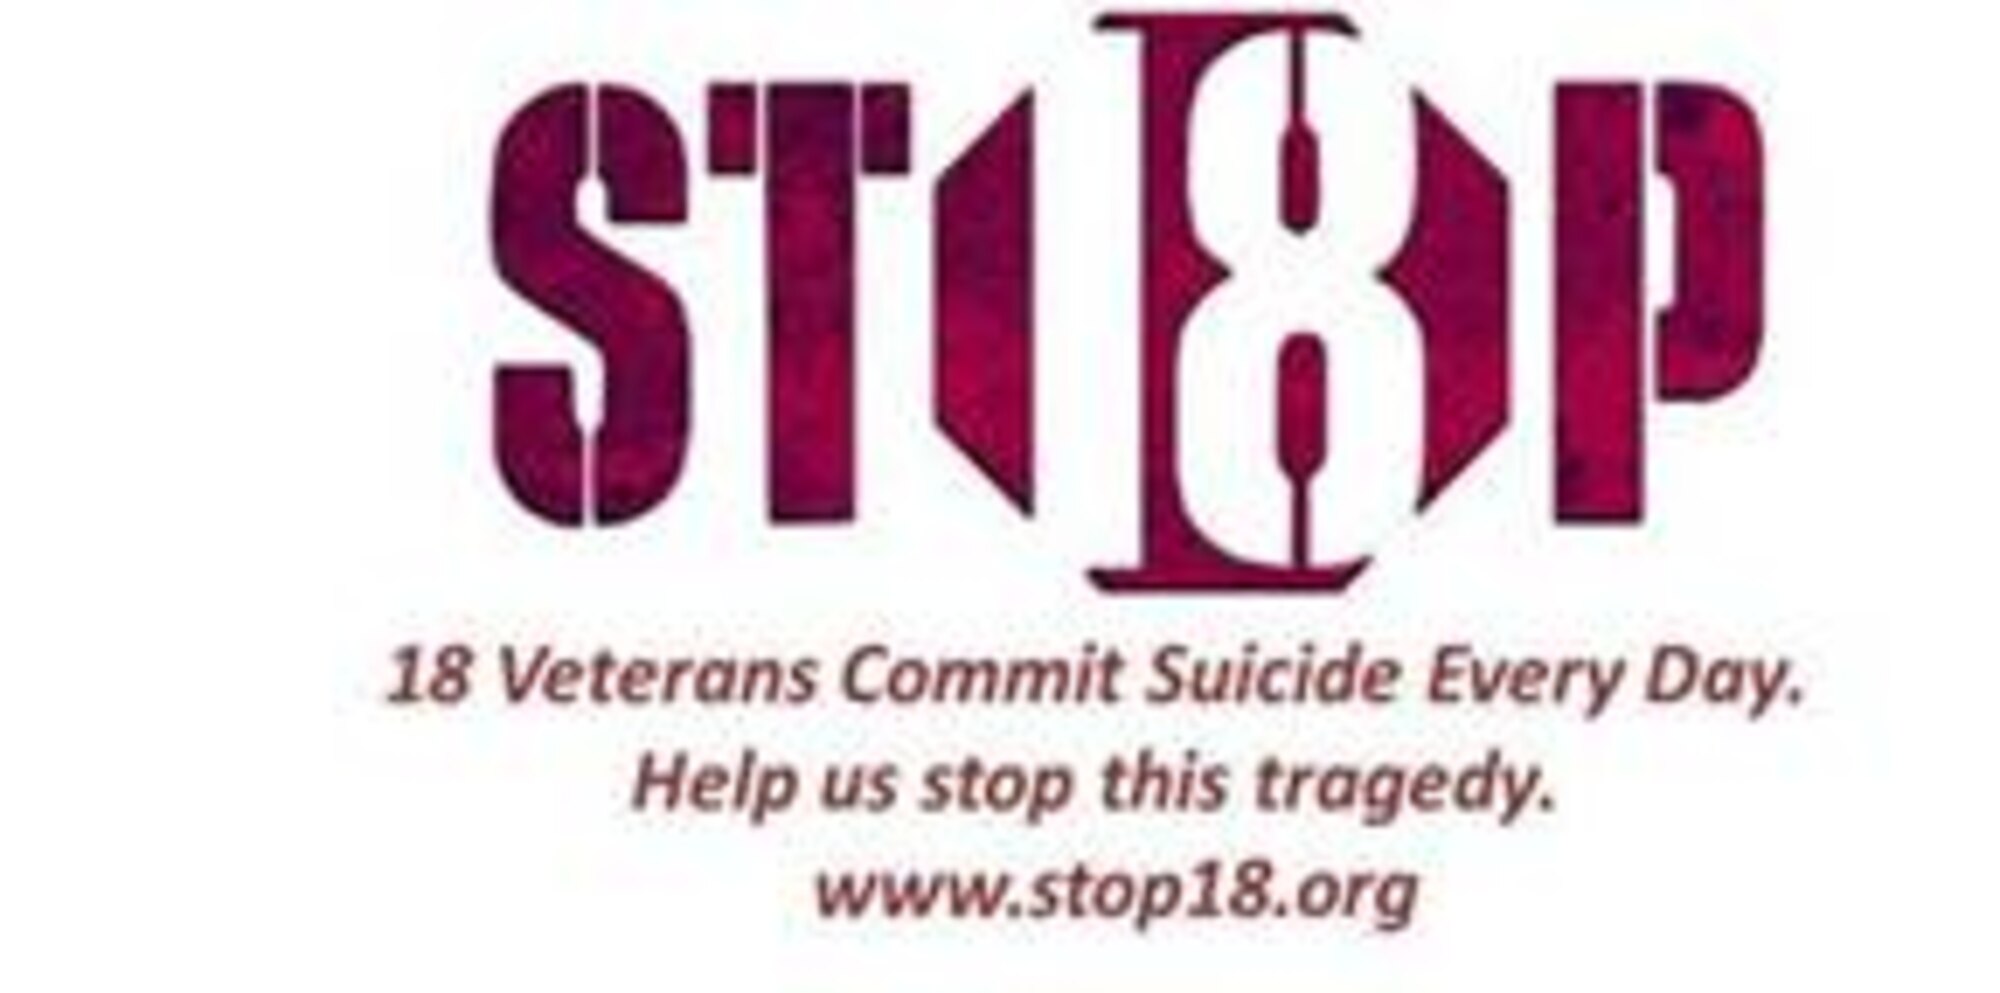 Sometimes, the bravest thing you can ever do, is ask for help. Now members of the military (active, Guard or Reserves), veterans and any family members can text the Veteran Crisis Center for help in averting suicide. No key word or specific messaging required. Just send a message to 838255. There is no cost no matter what service provider you use and it is completely confidential.